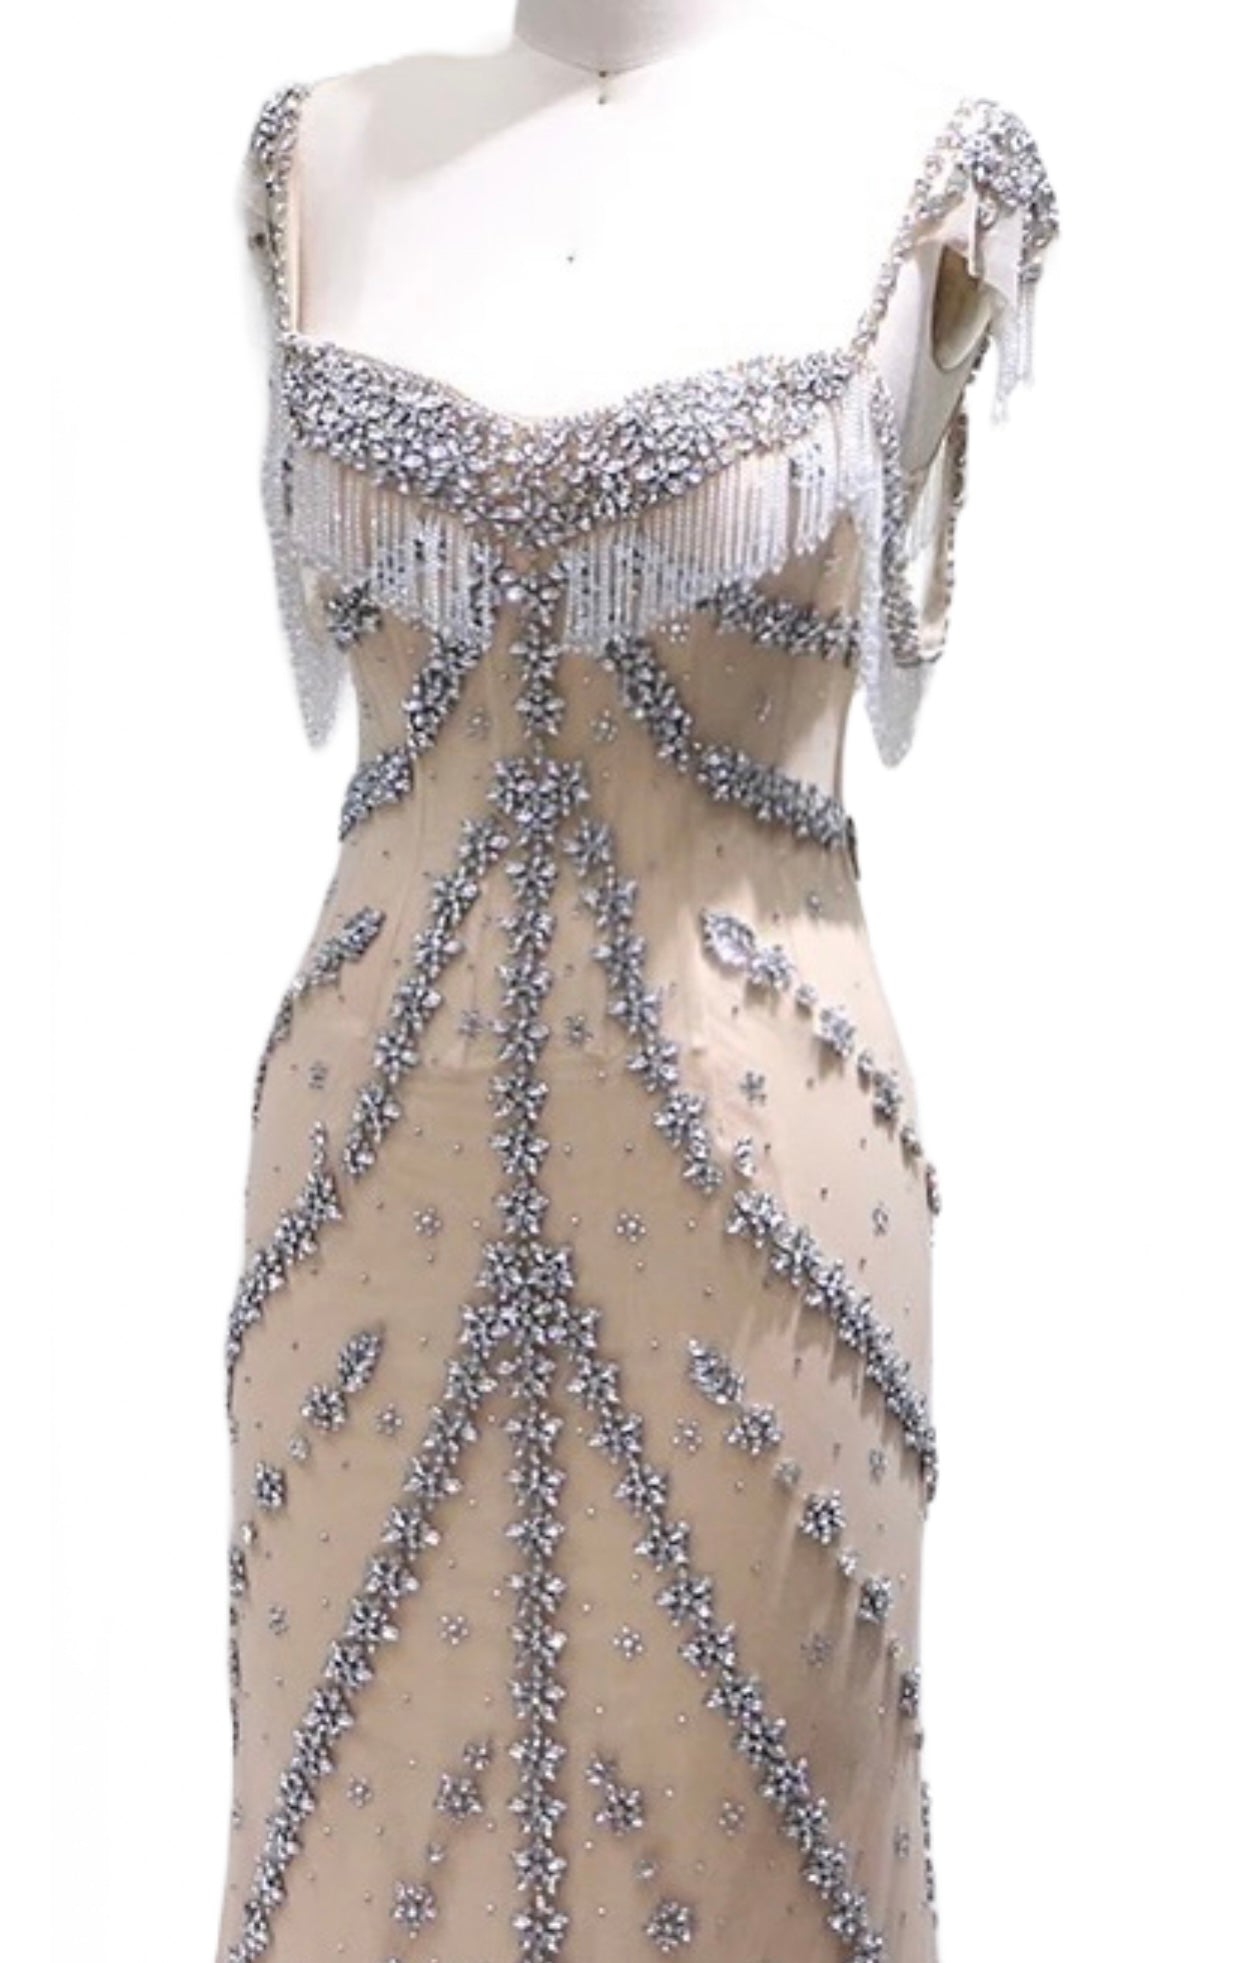 KENDALL GOWN